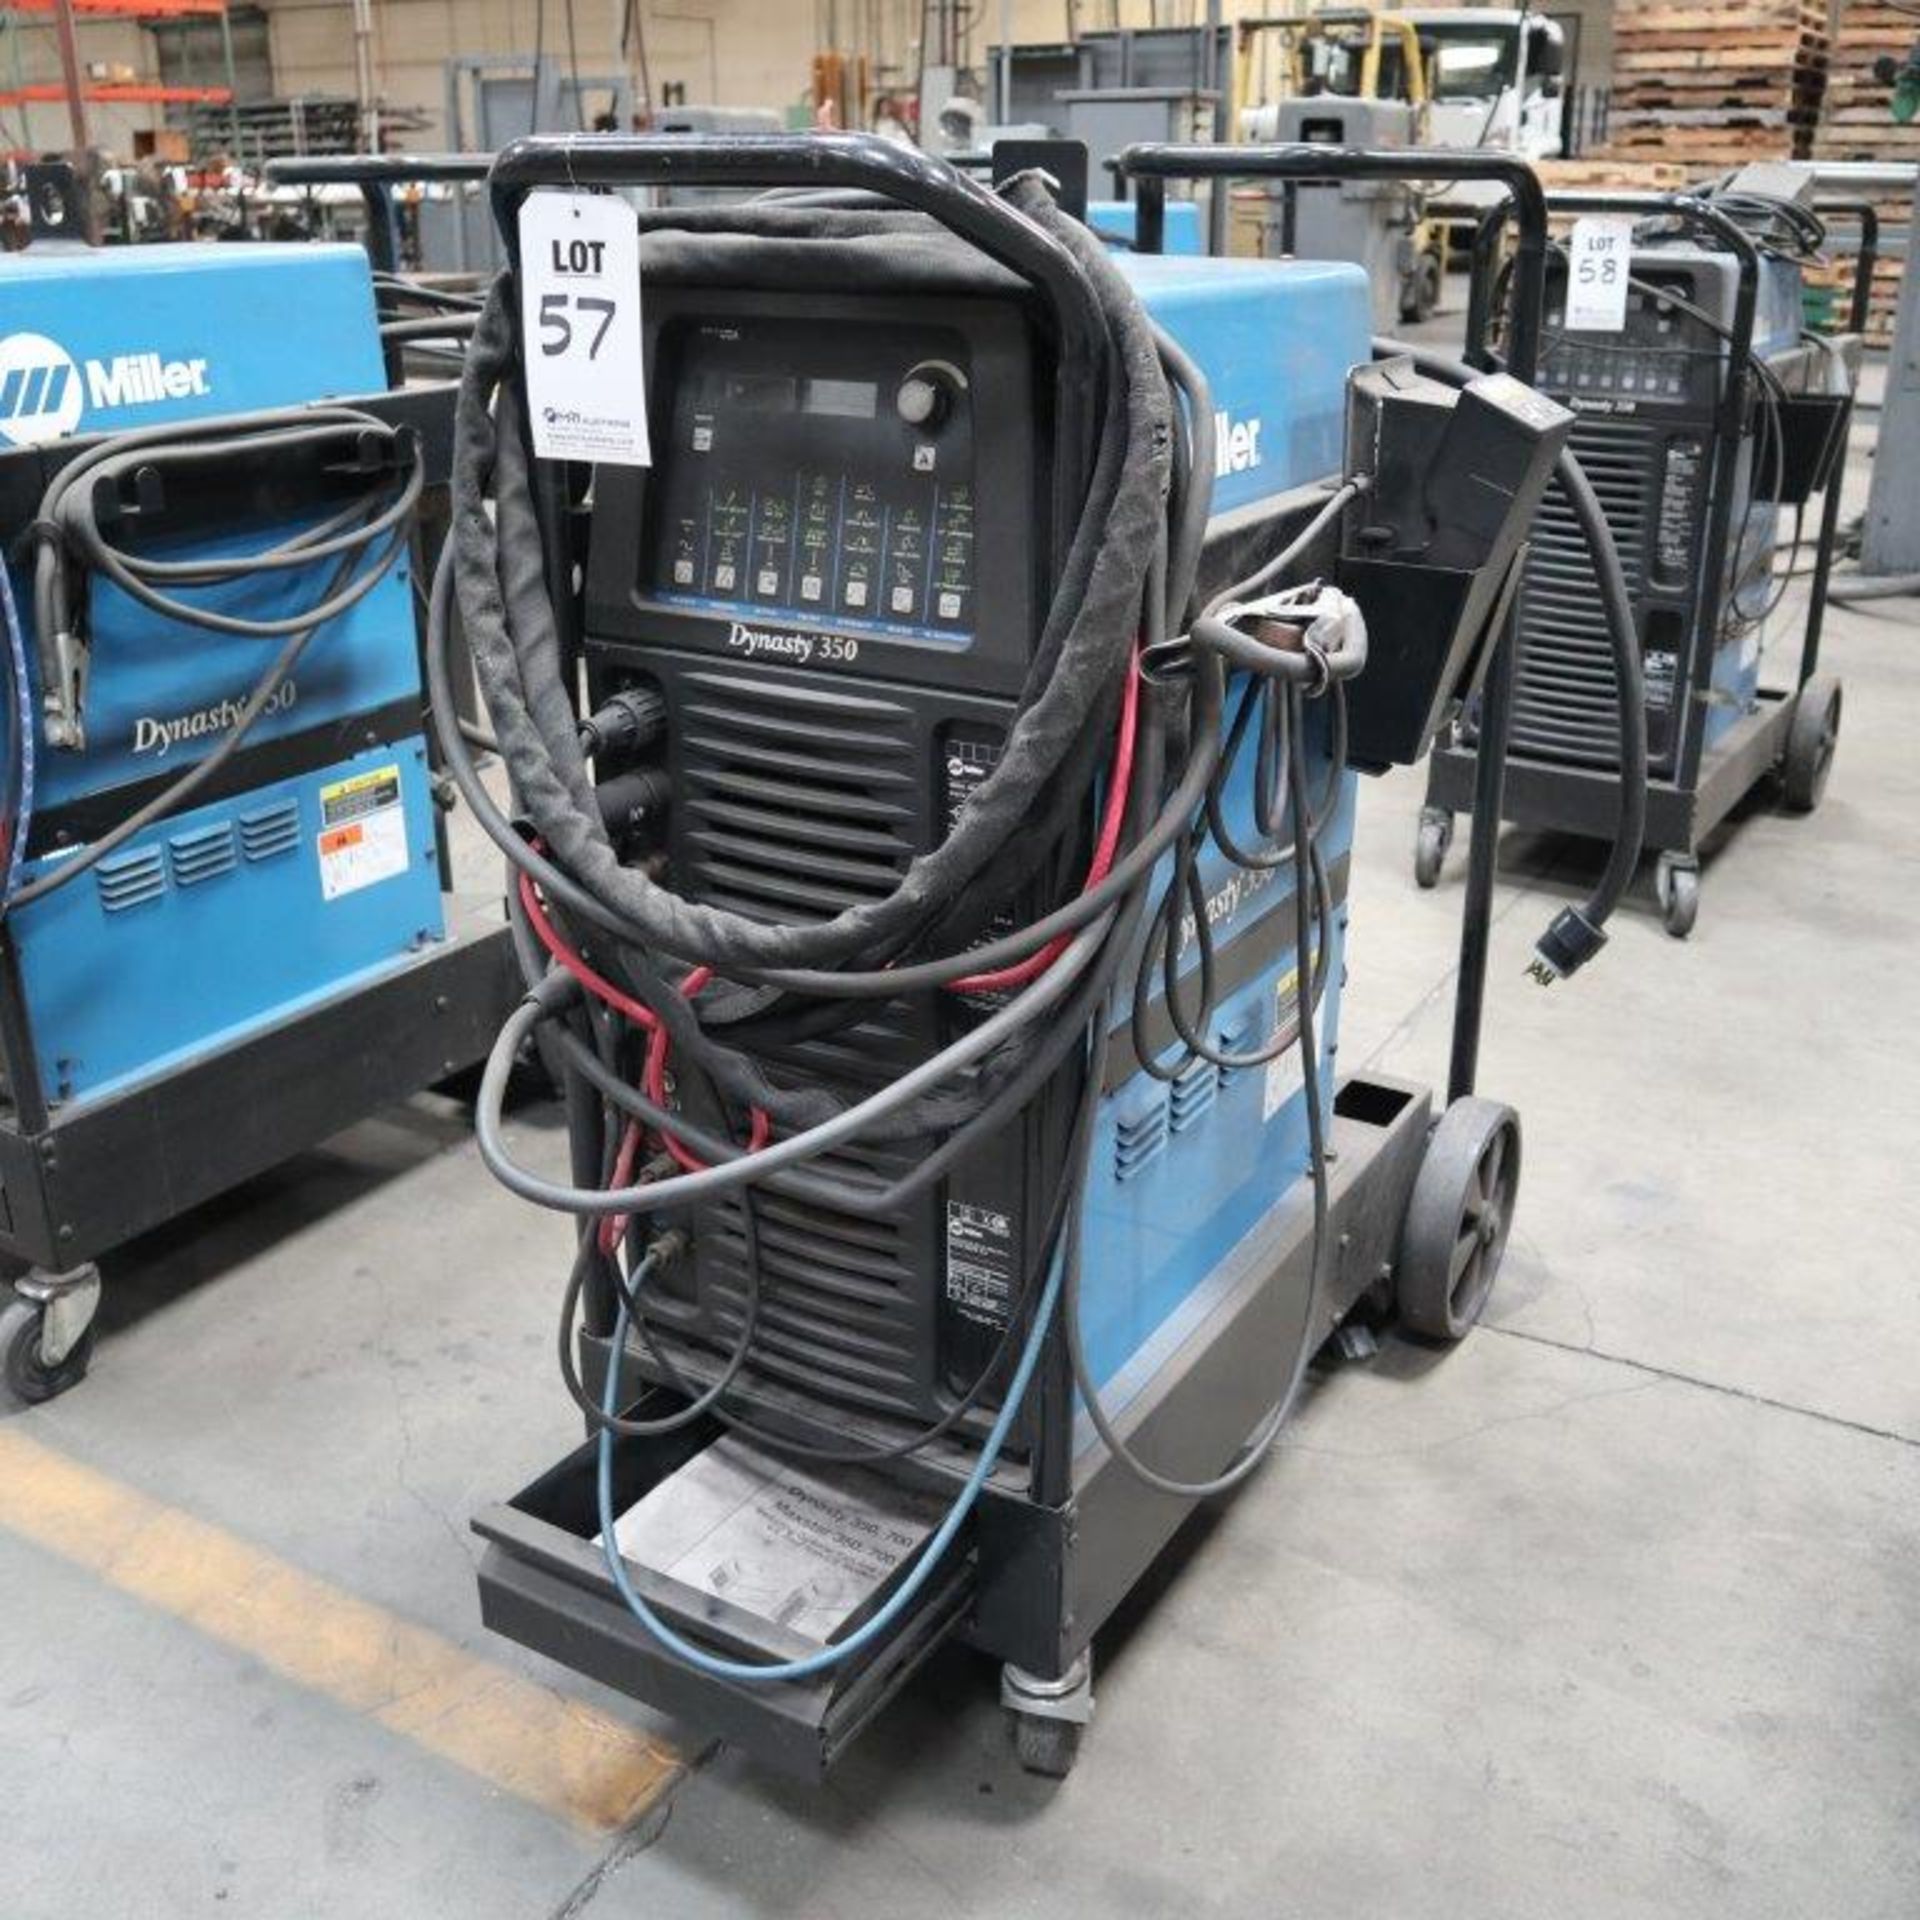 MILLER DYNASTY 350 AC/DC TIG AND STICK WELDER, WATER COOLED, WITH ROLLING CART WITH CABLES, S/N